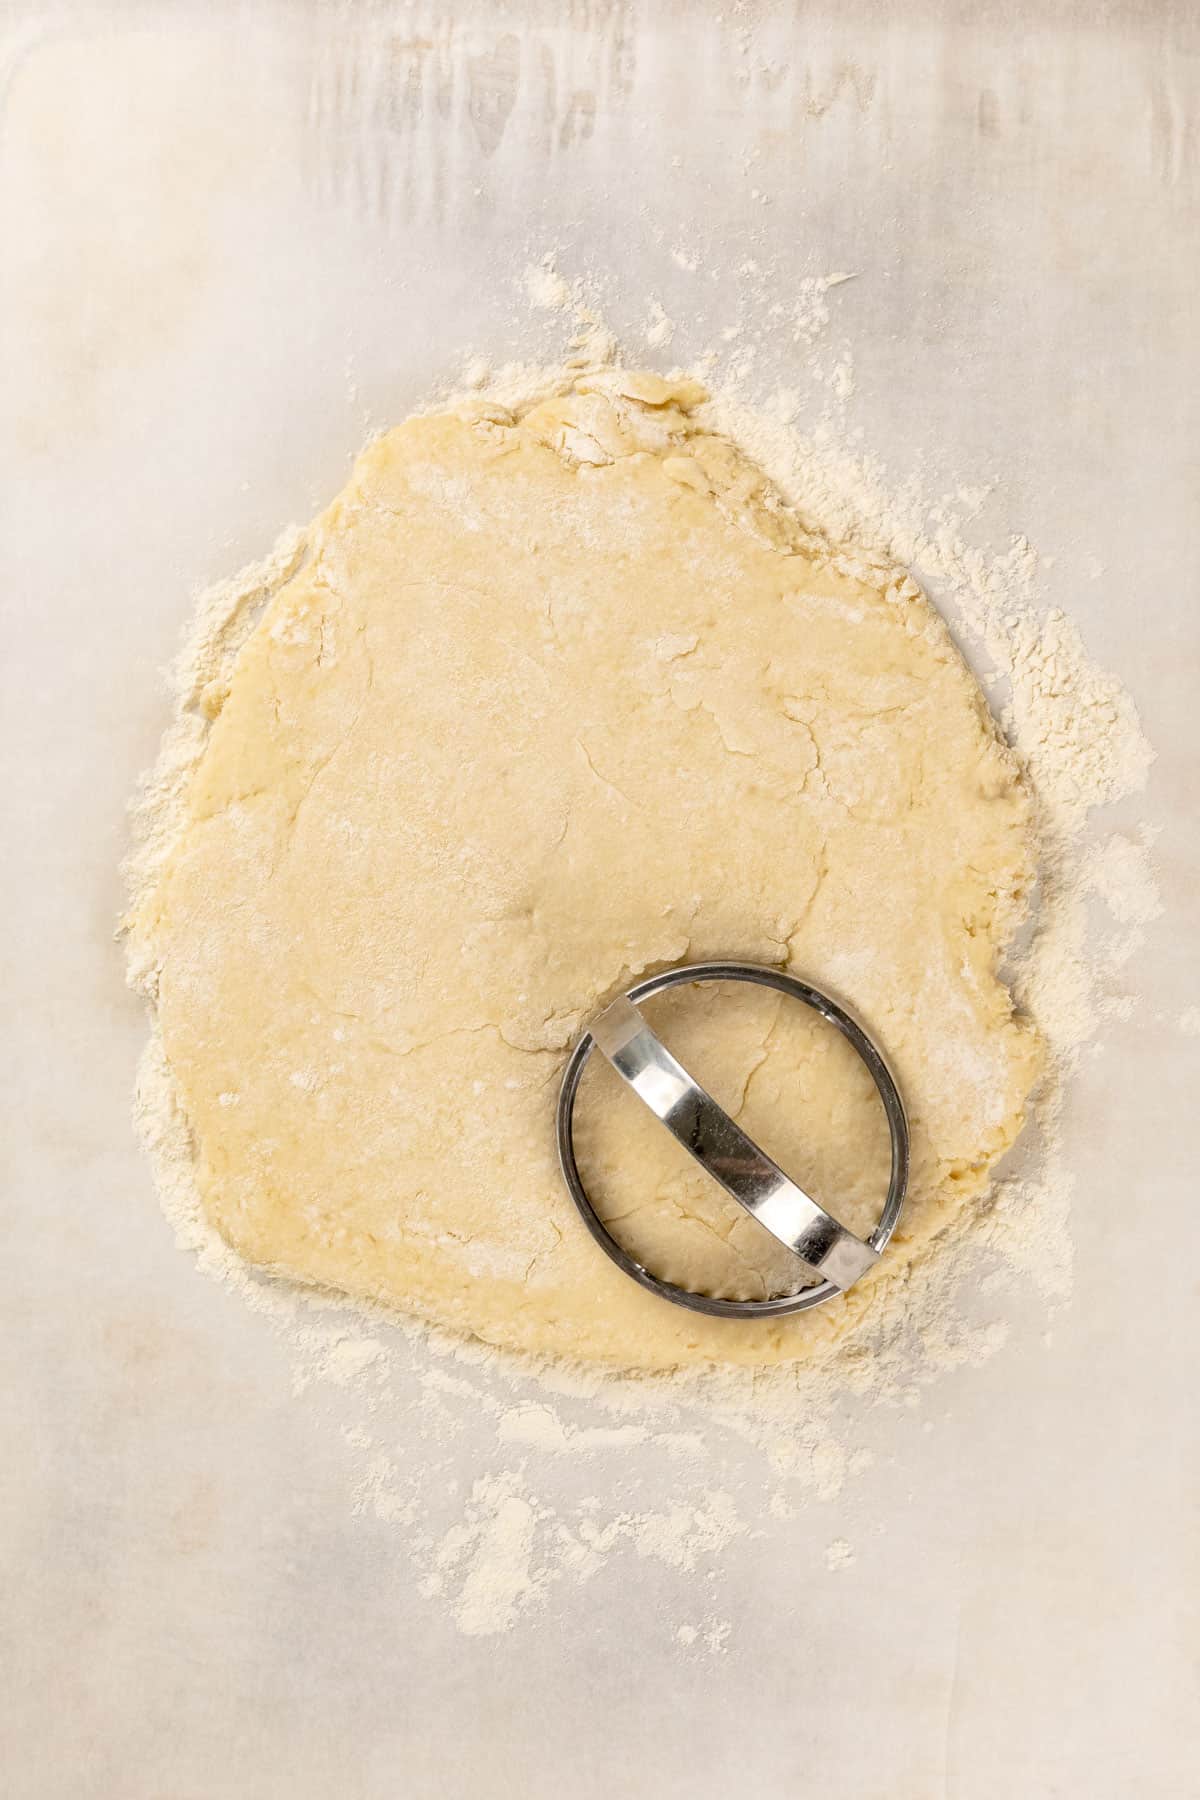 The rolled dough dough for vegan shortcakes with a round biscuit cutter in the bottom right.